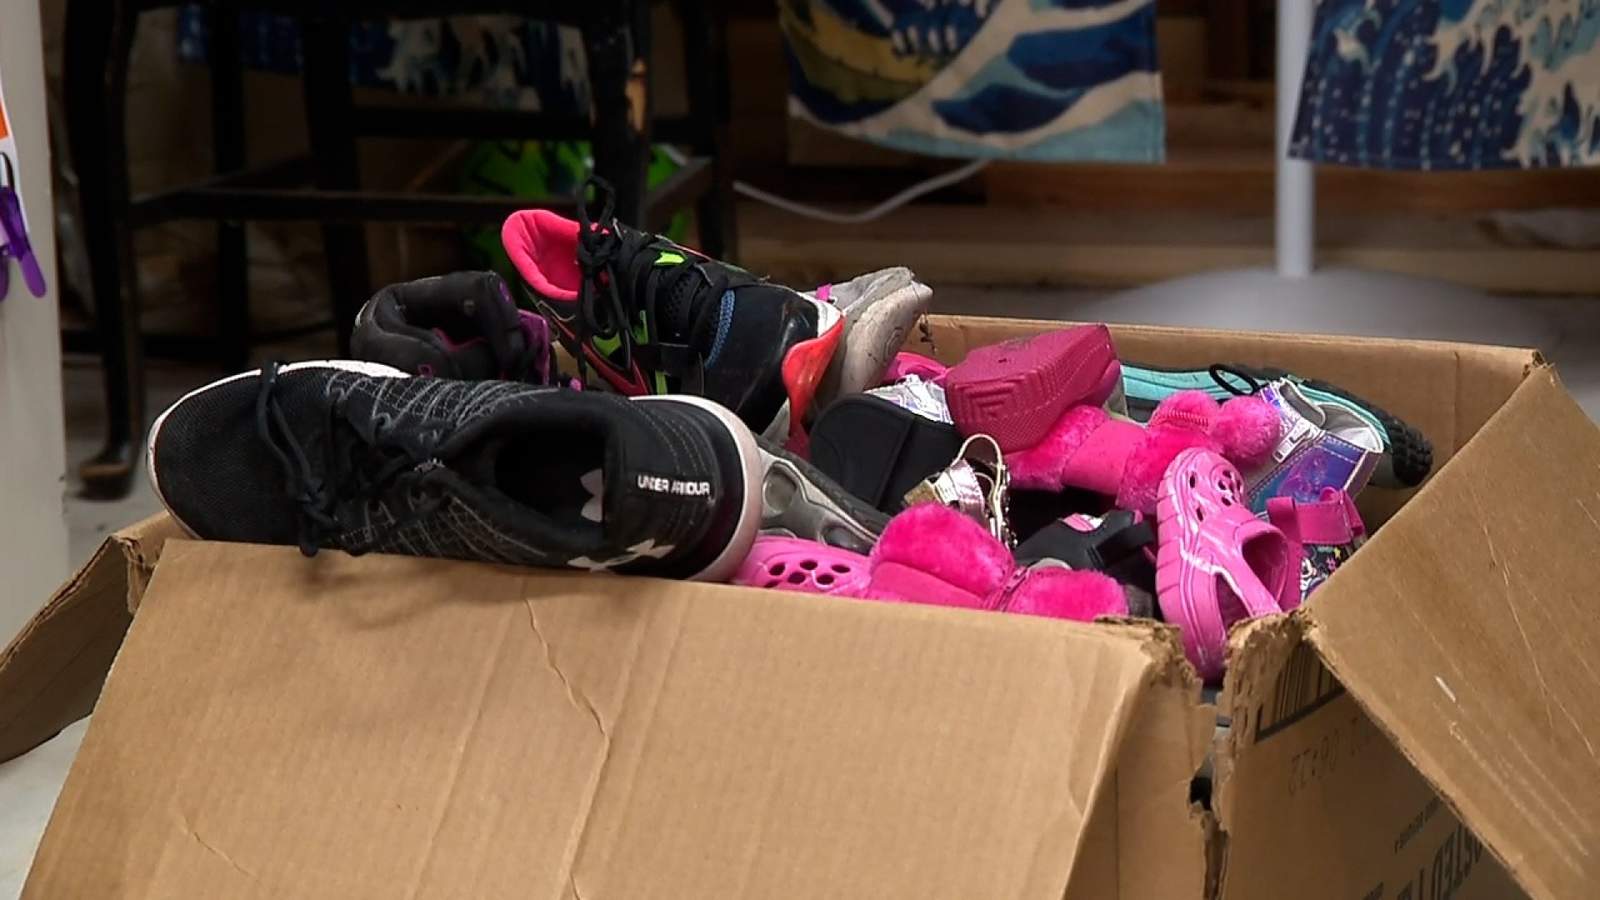 November shoe and sock drive to help adults living on the streets